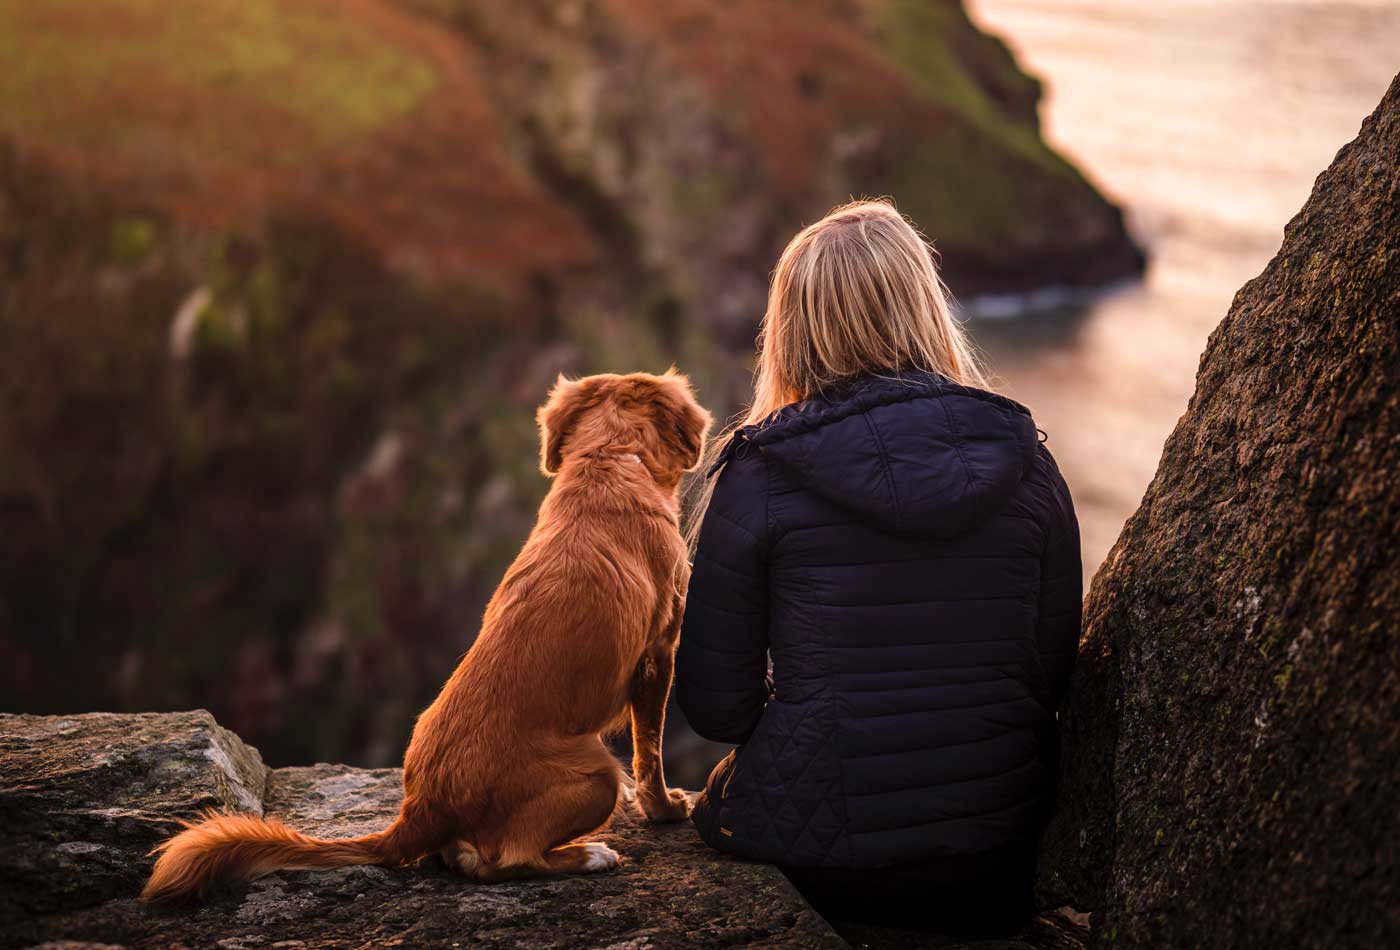 Shows a woman looking out at the sea with a dog